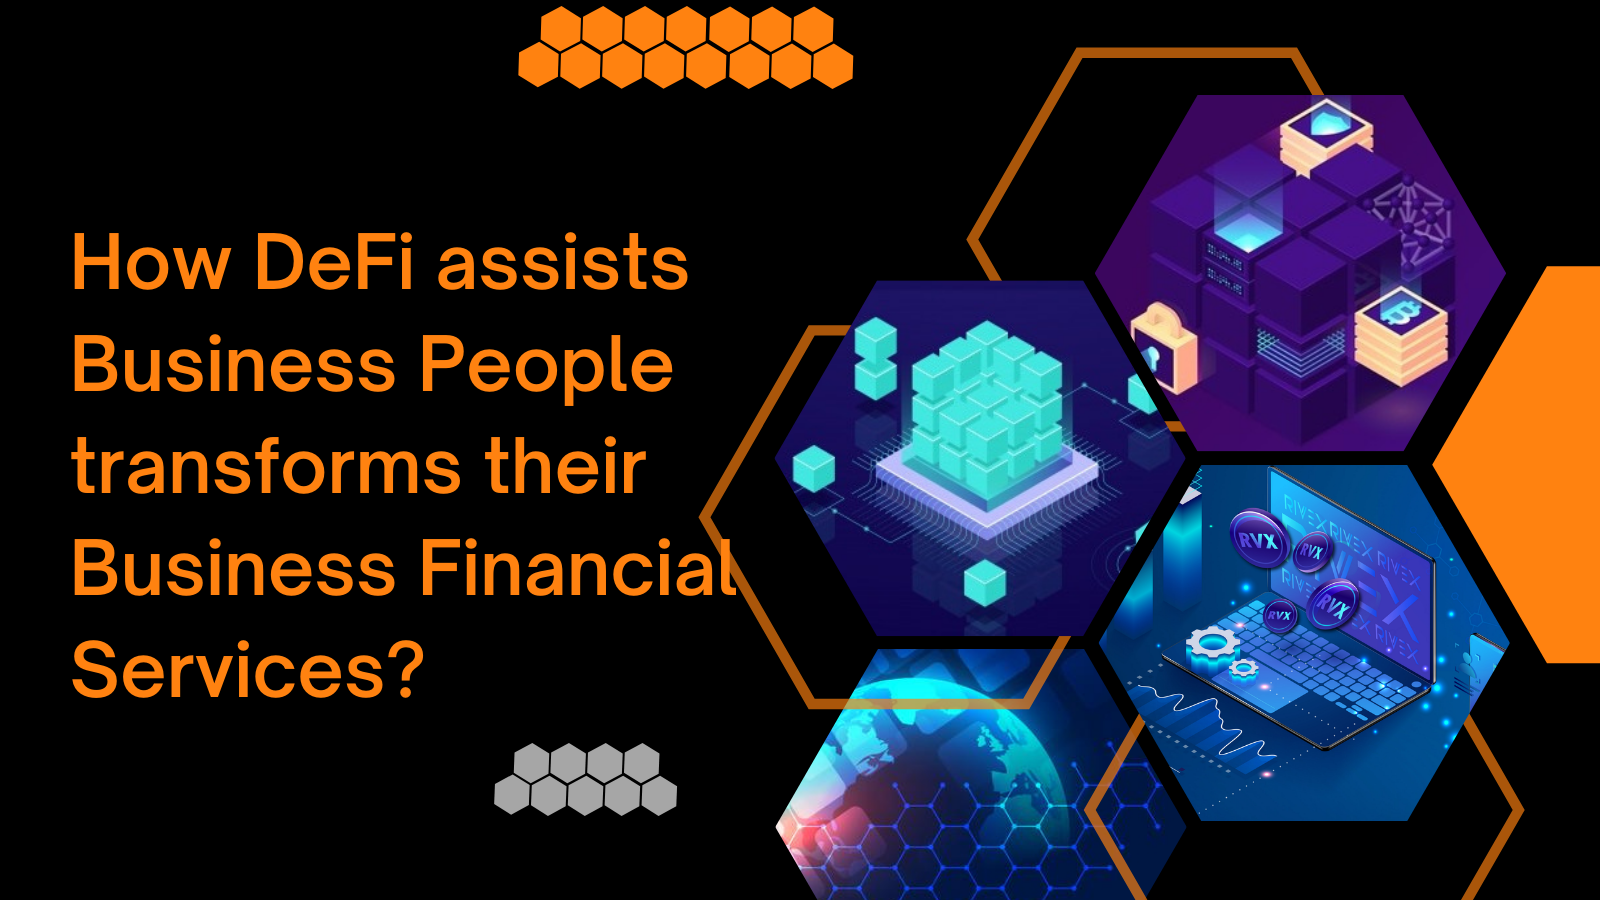 How DeFi assist business people to transform their business financial services